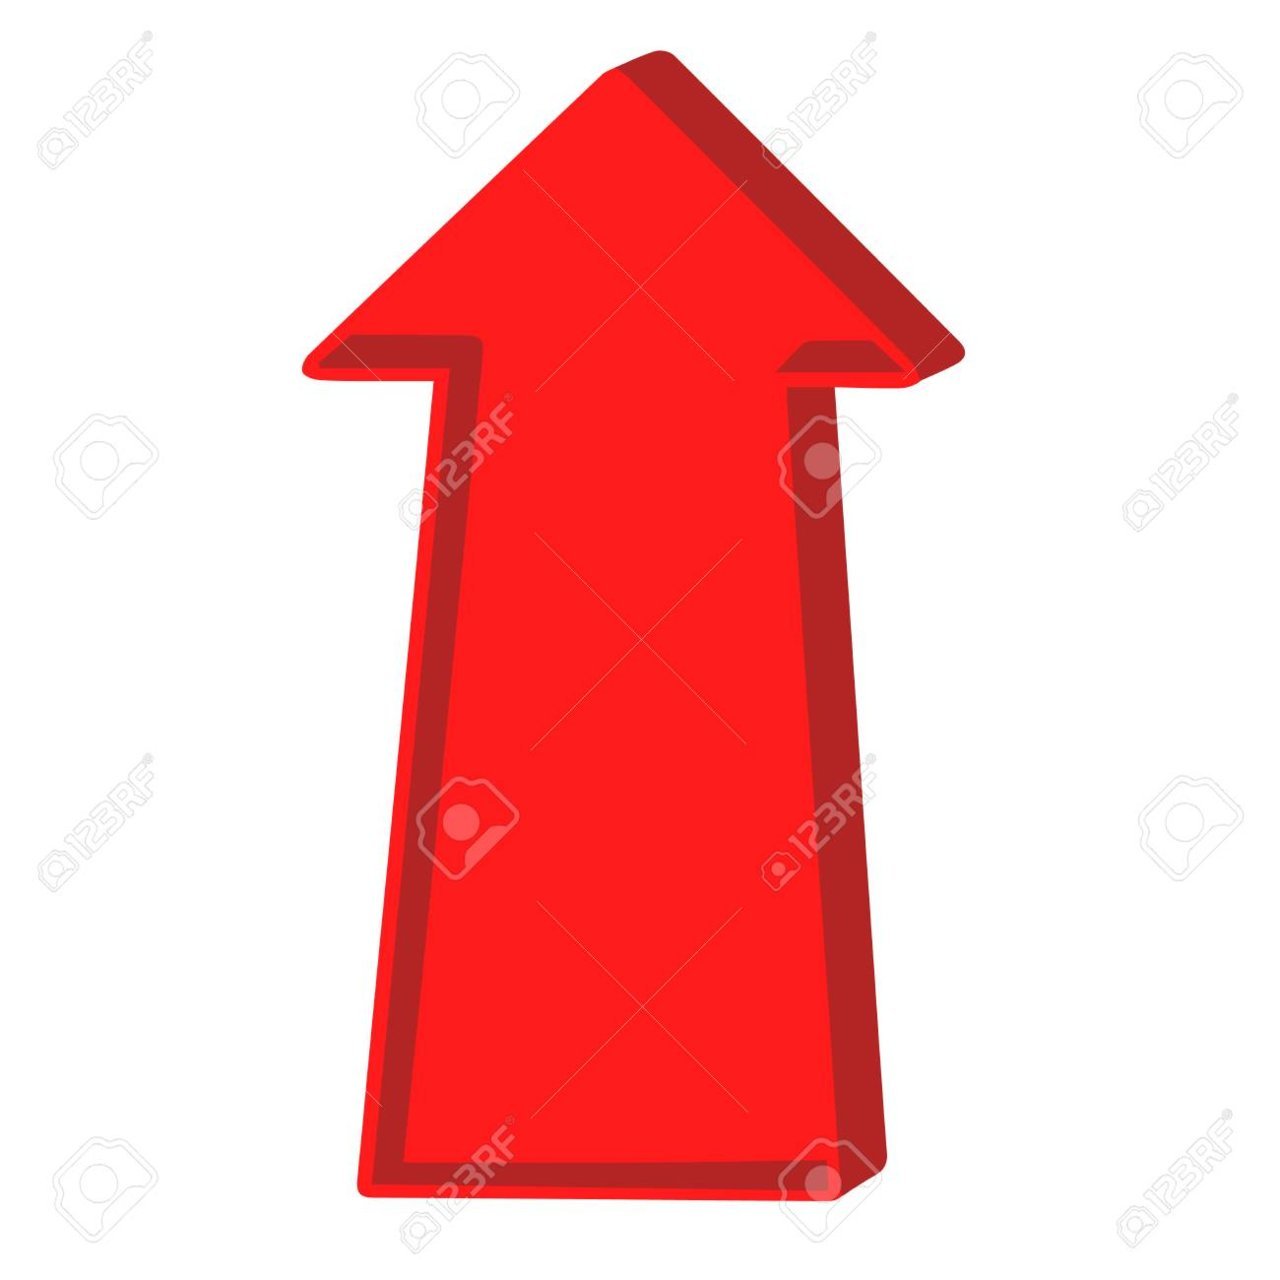 119363454-red-arrow-pointing-up-on-a-white-background-.jpg